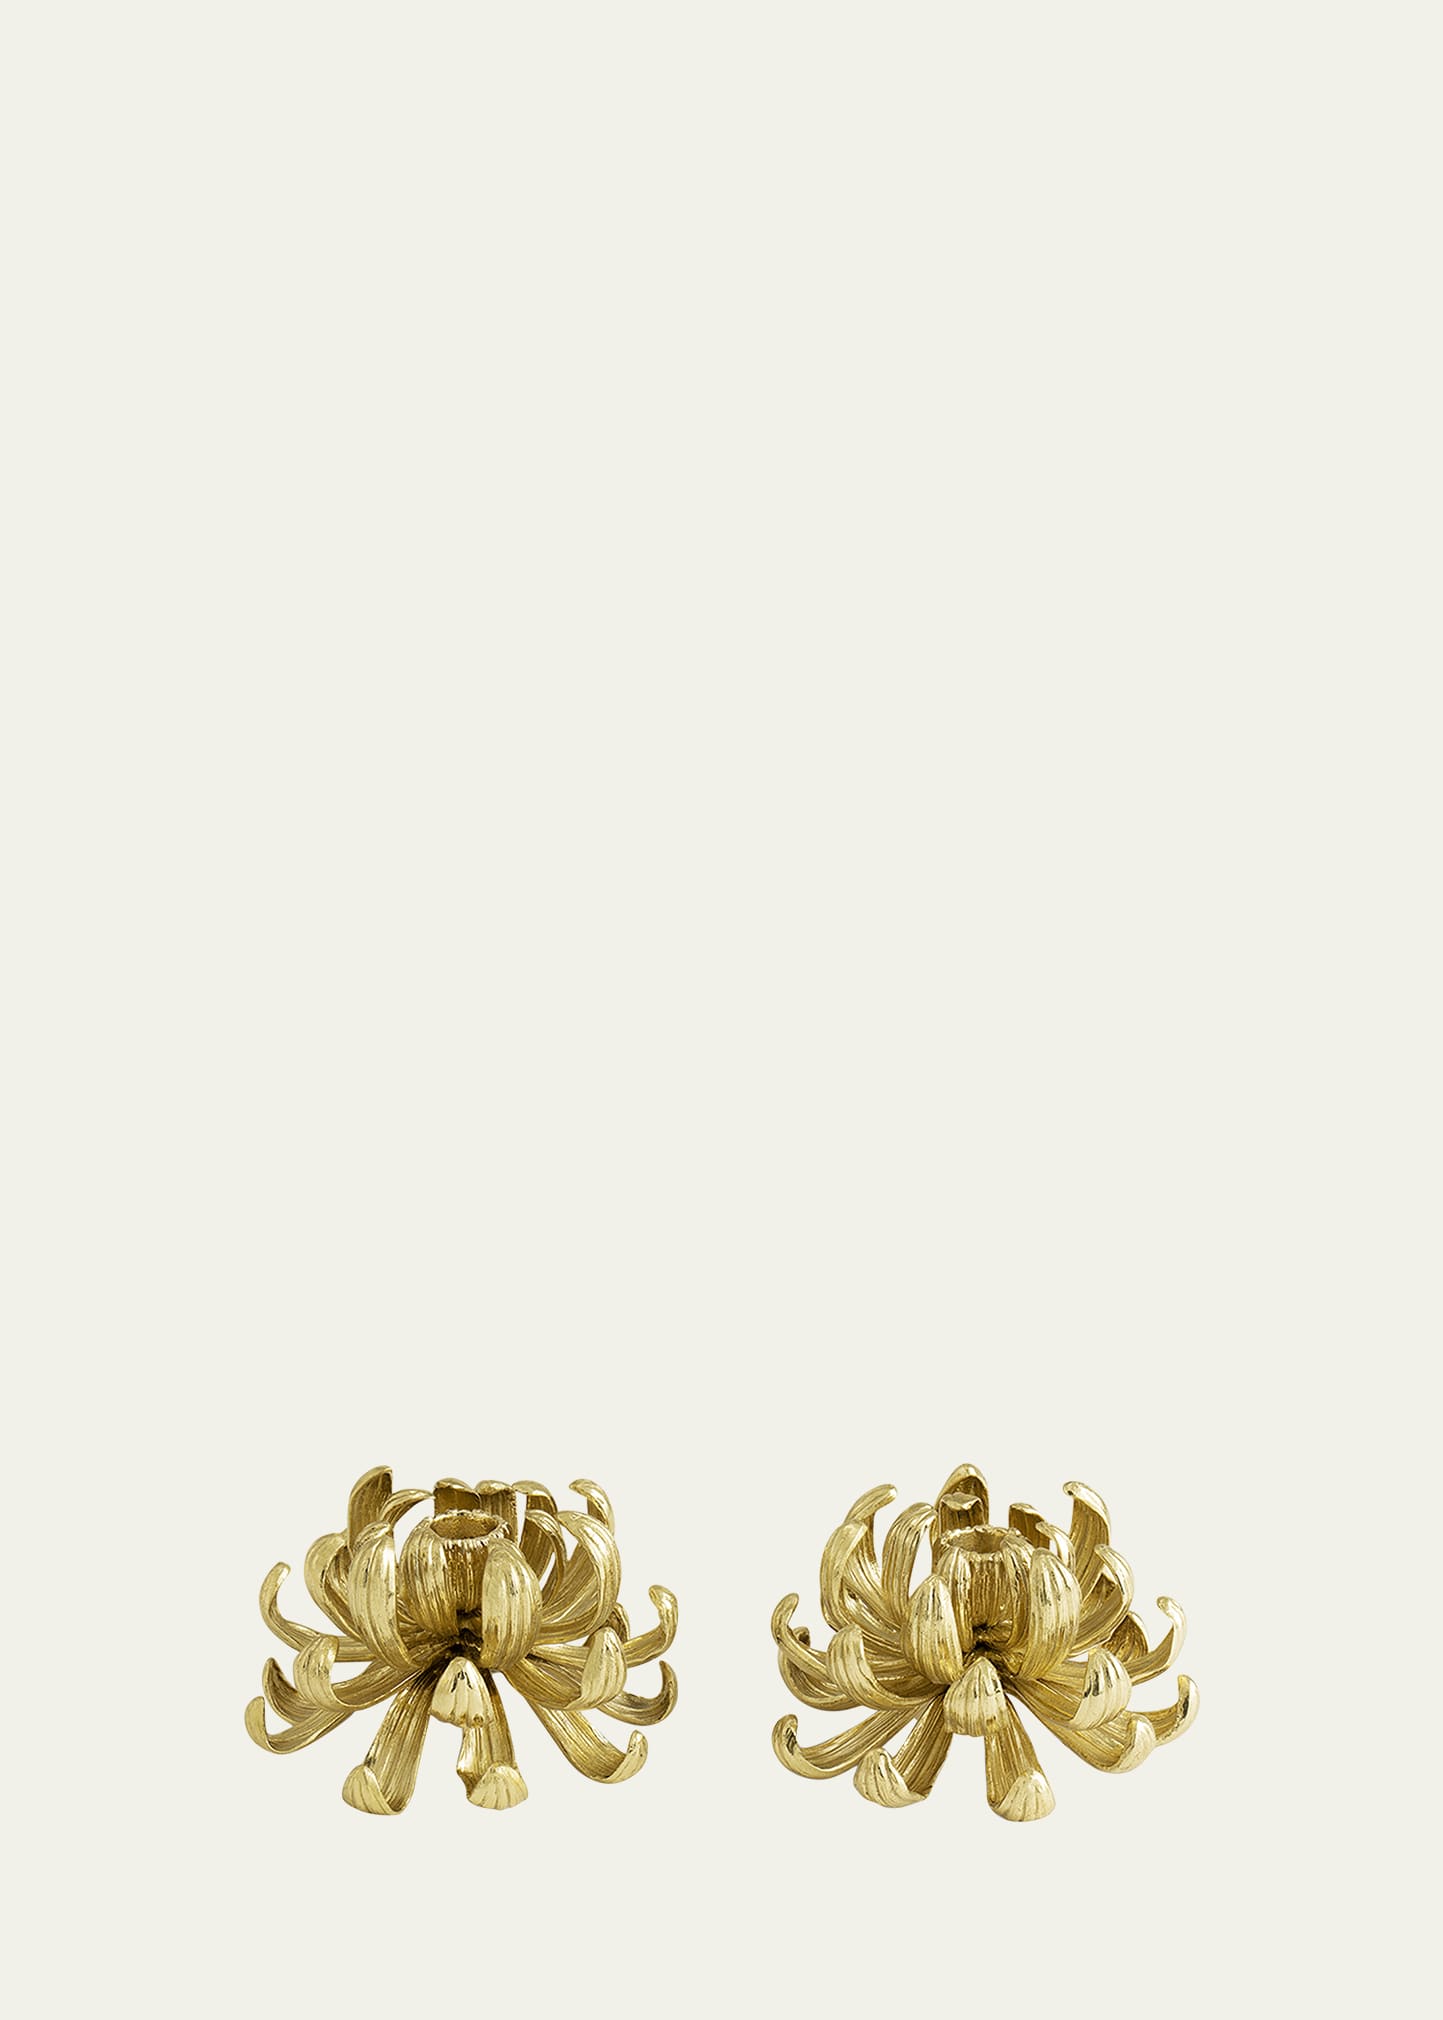 Michael Aram Dahlia Candle Holders, Set Of 2 In Gold